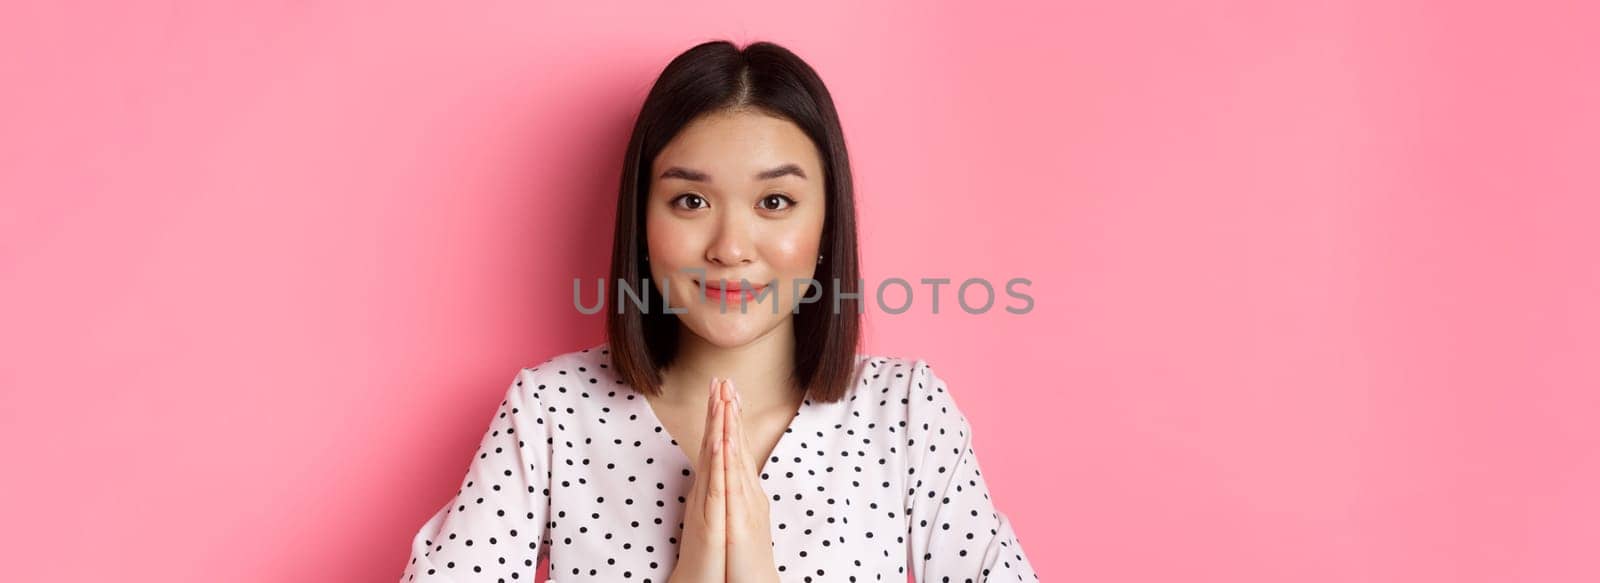 Beauty and lifestyle concept. Close-up of cute asian woman smiling, showing thank you gesture, holding hands in pray, standing over pink background.